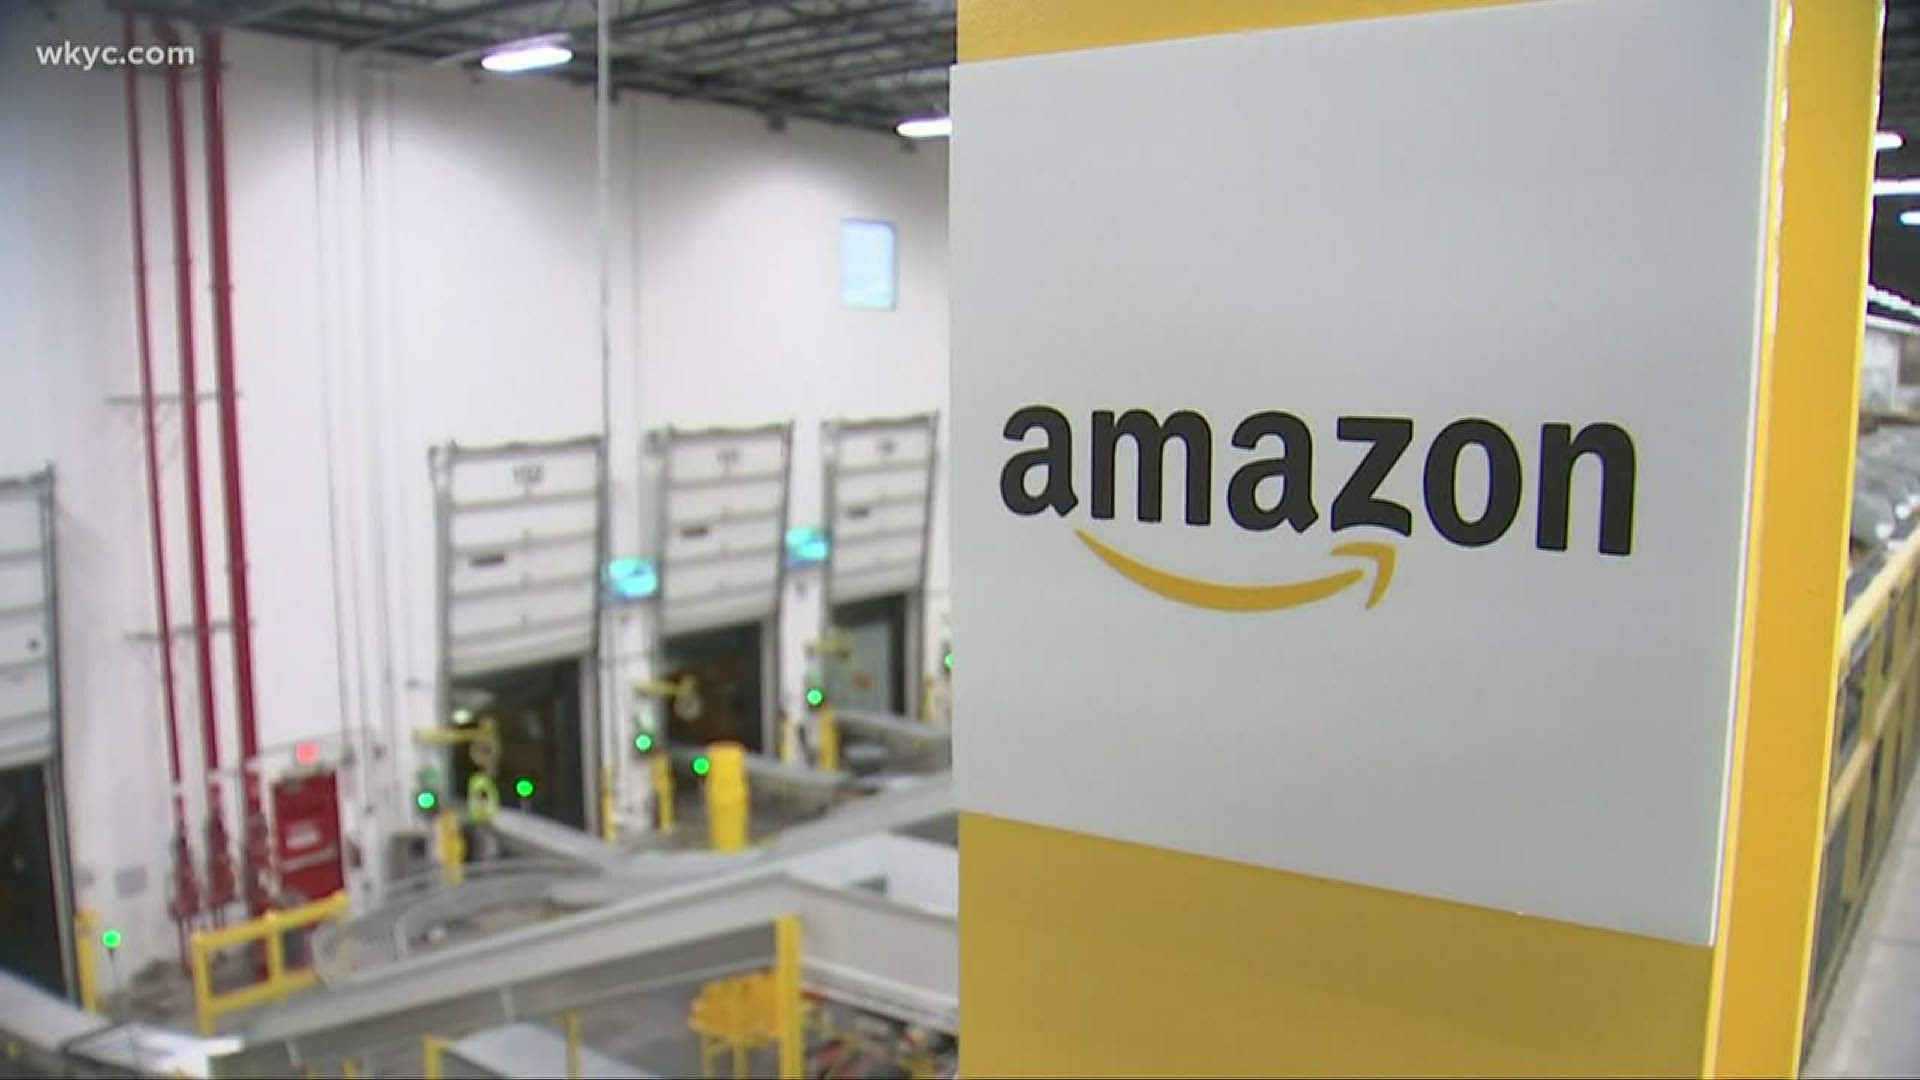 Looking for work? Amazon is currently looking to hire people for 75,000 additional jobs.